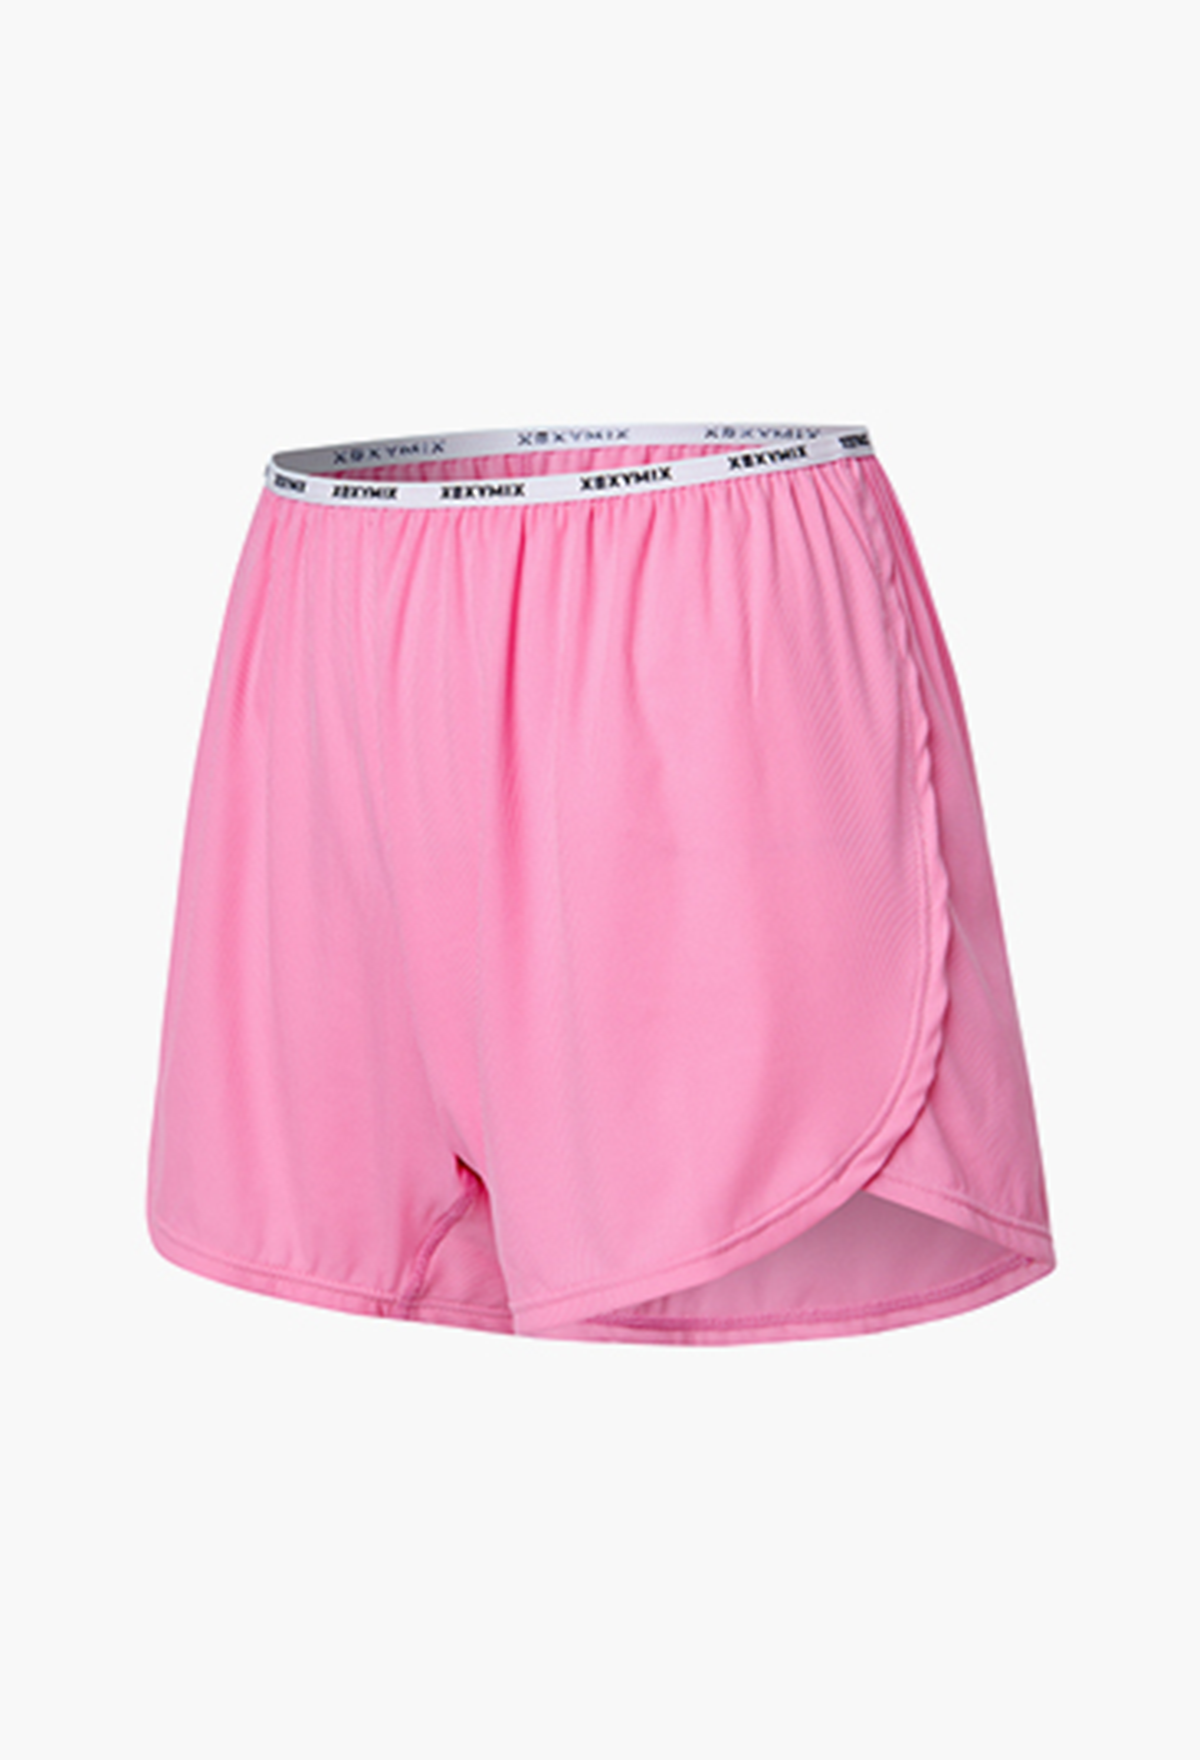  LB6005F_Flare Woman Trunks_Pink Muhly 